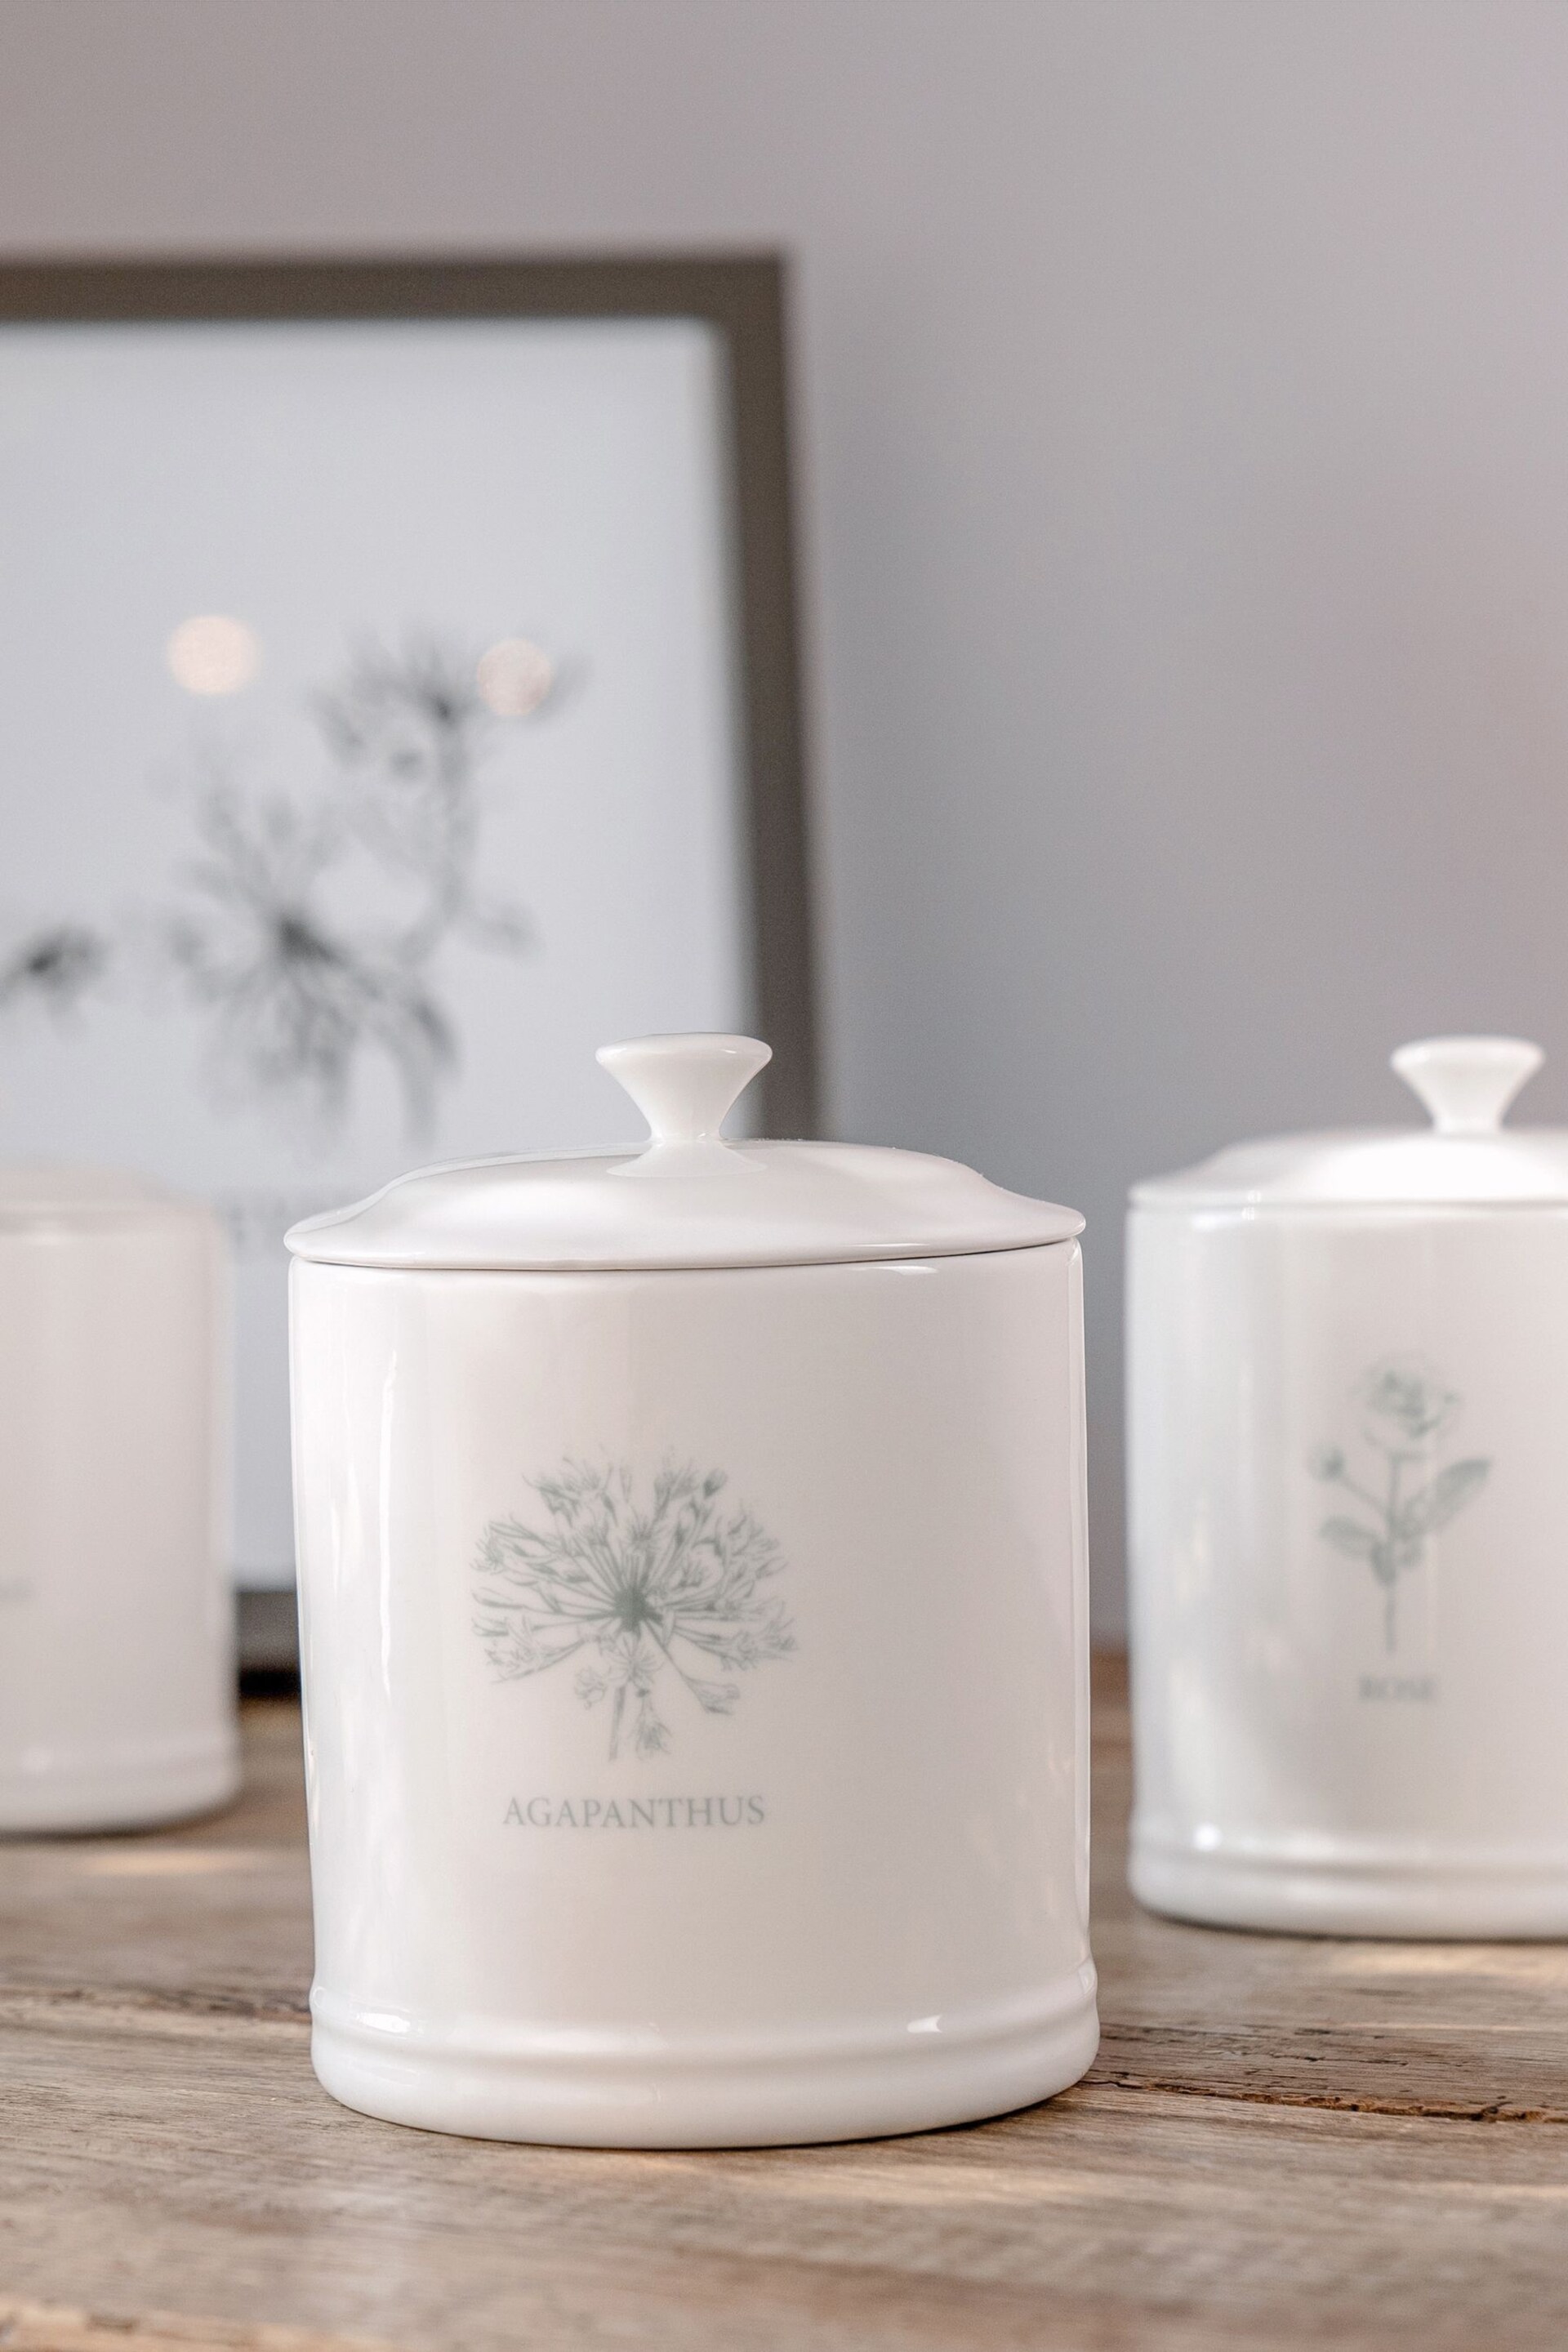 Mary Berry Set of 3 White Garden Flowers Canisters - Image 1 of 3